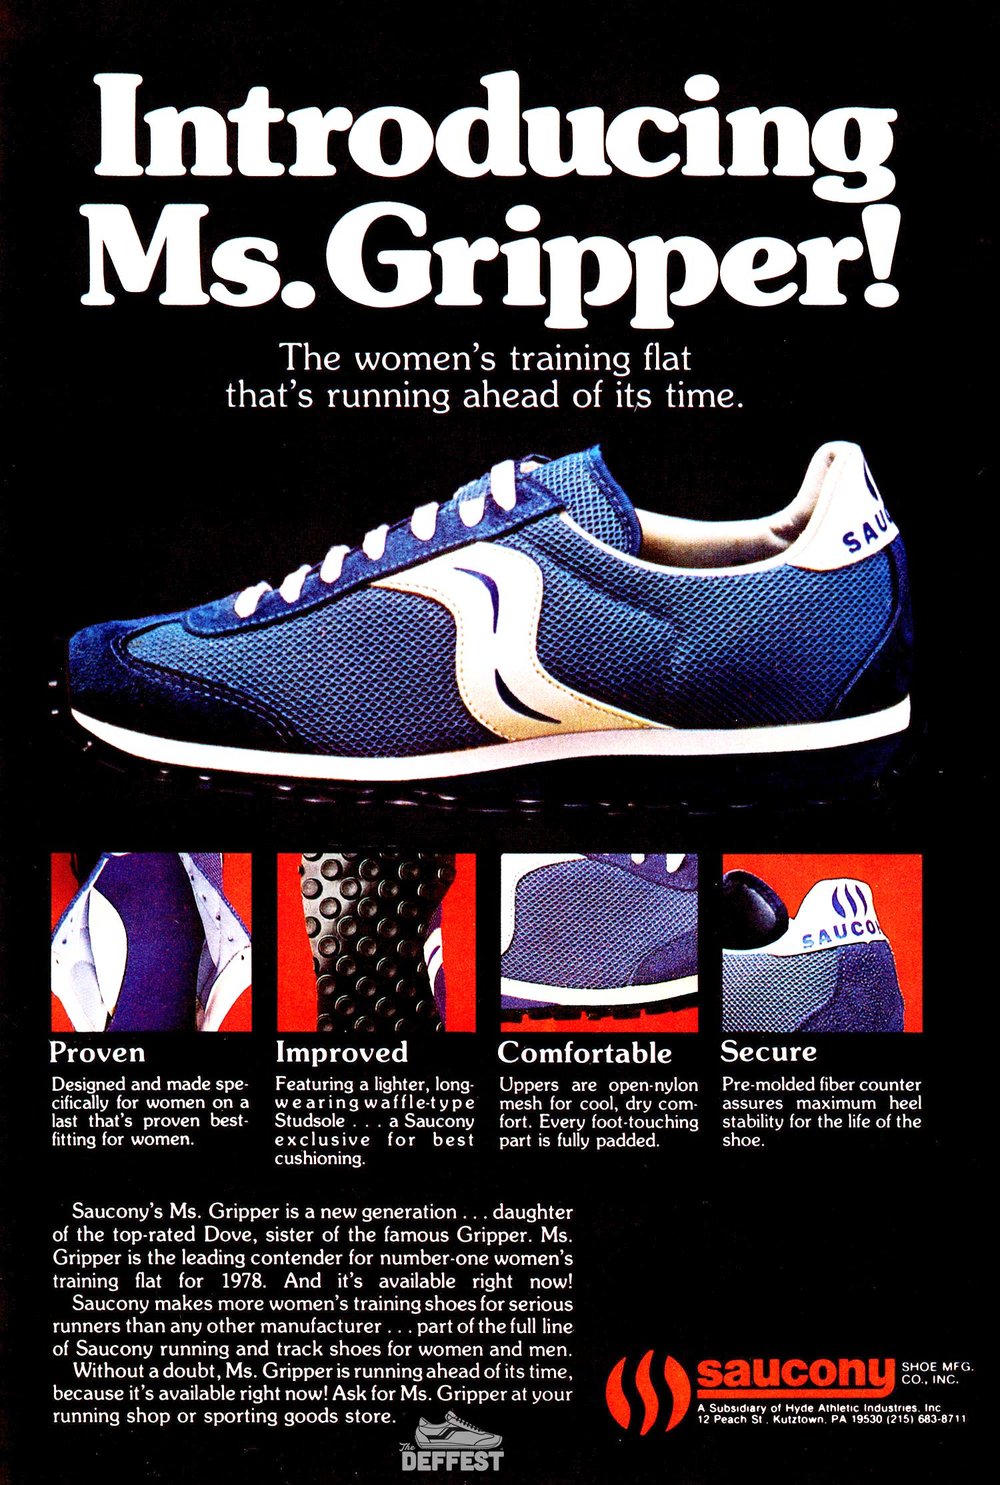 1978 advertisement — The Deffest®. A vintage and retro sneaker blog. —  Vintage Ads